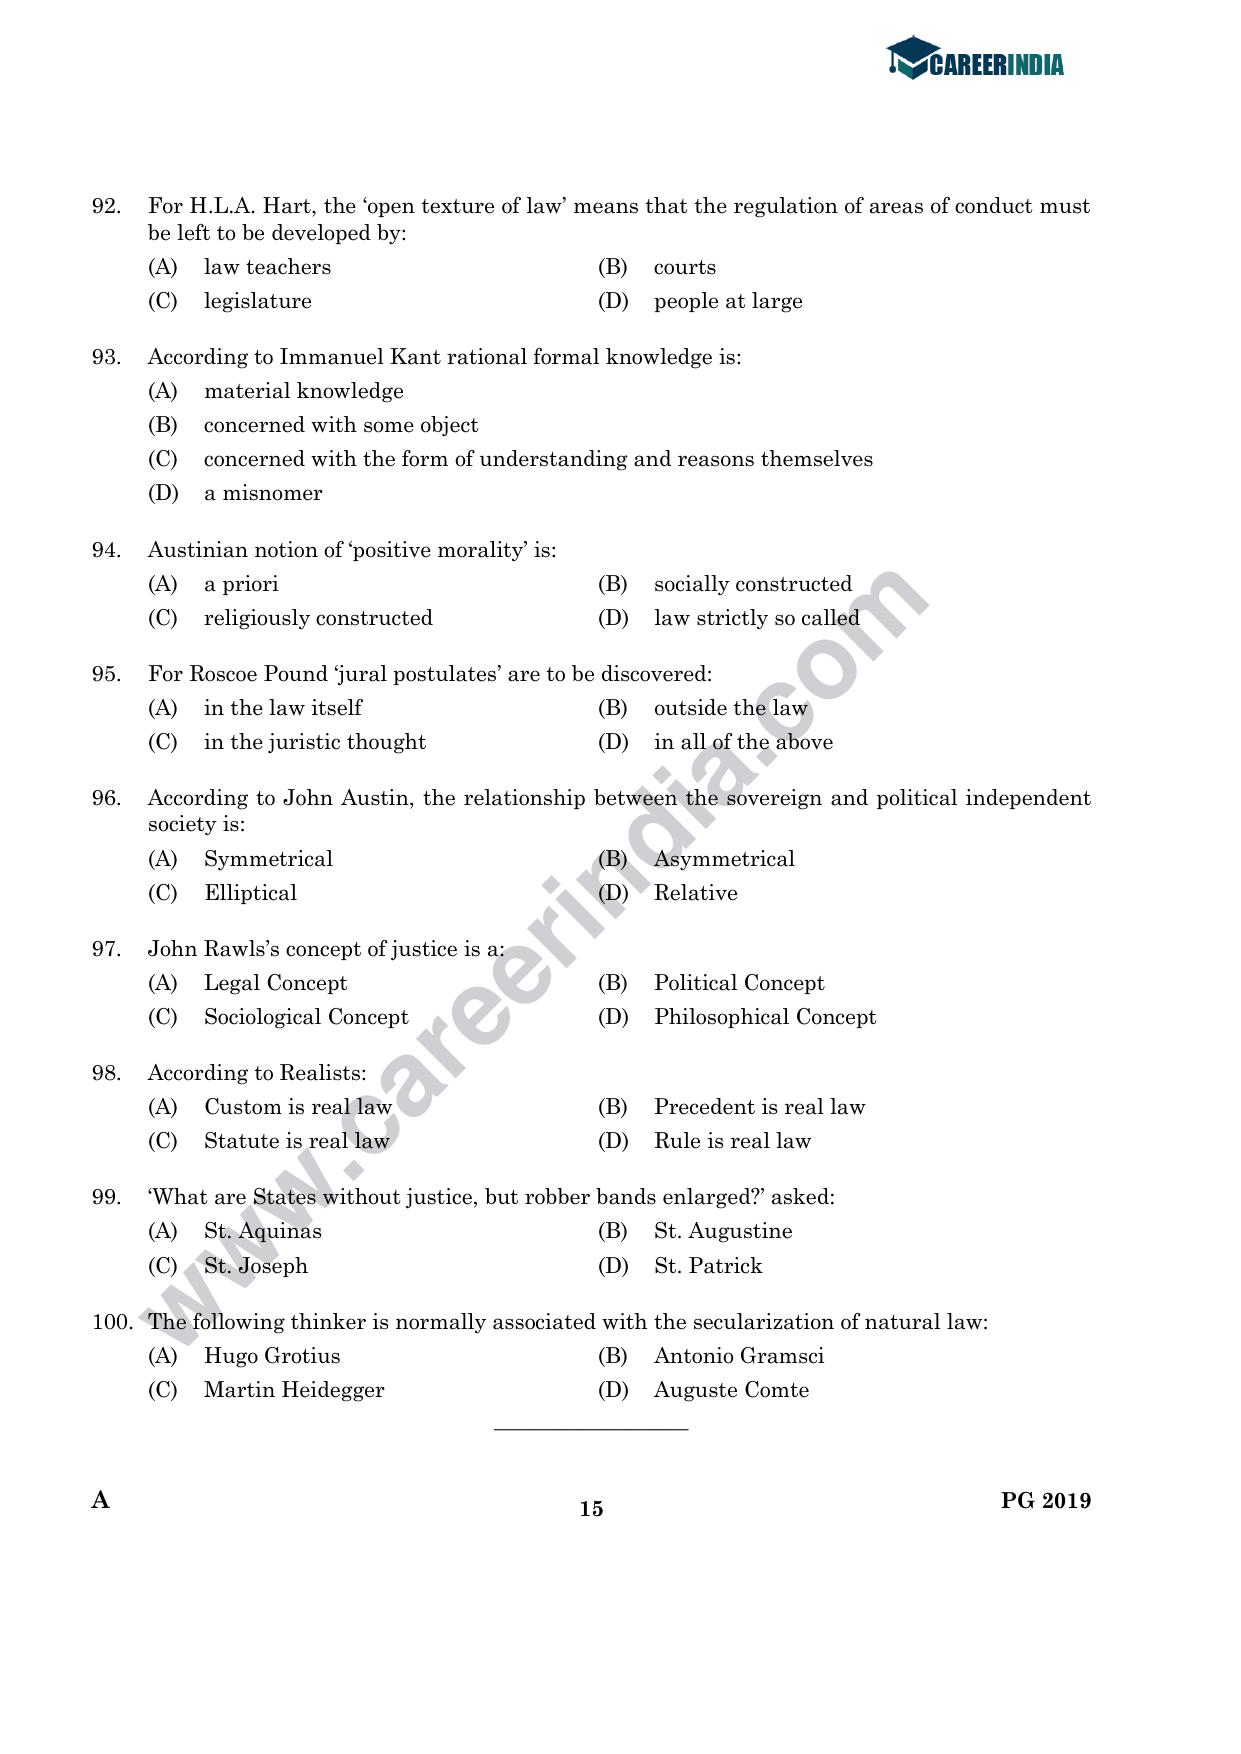 CLAT 2019 PG A-Series Question Papers (C.L.A.) - Page 14